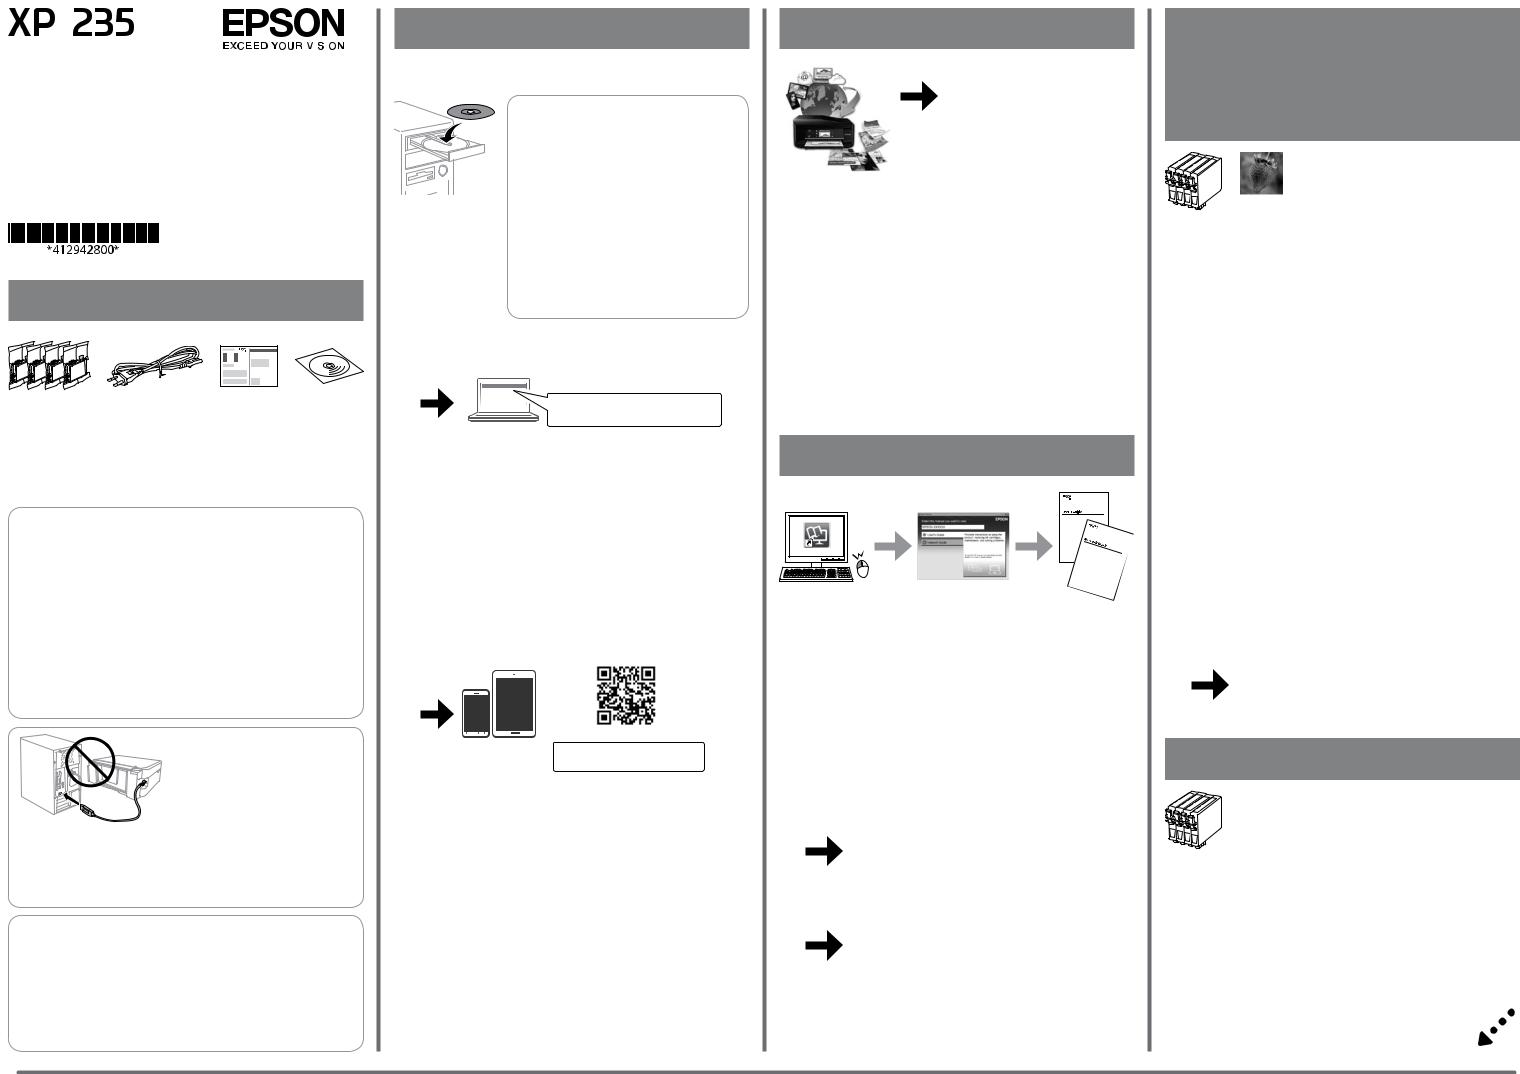 EPSON EXPRESSION HOME XP-235 User Manual